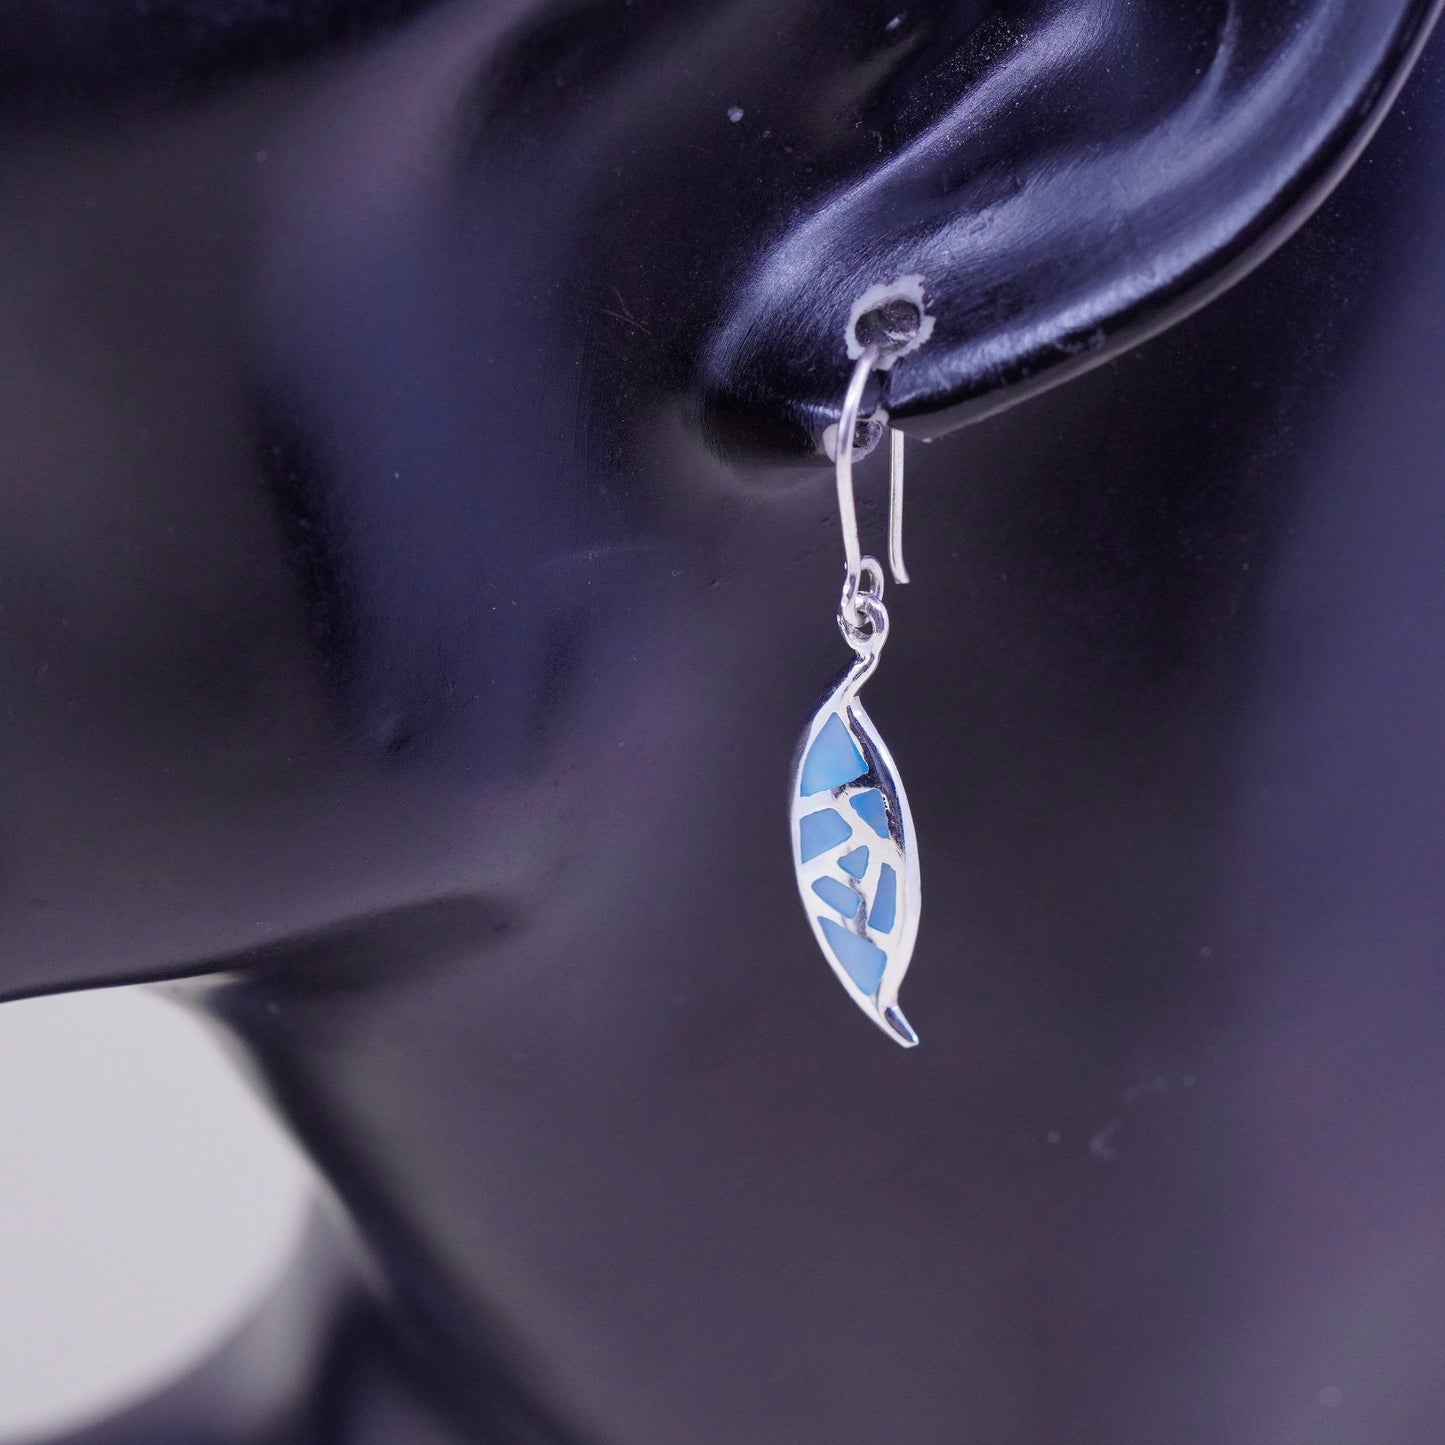 Vintage sterling 925 silver handmade earrings with blue mother of pearl drop, stamped 925